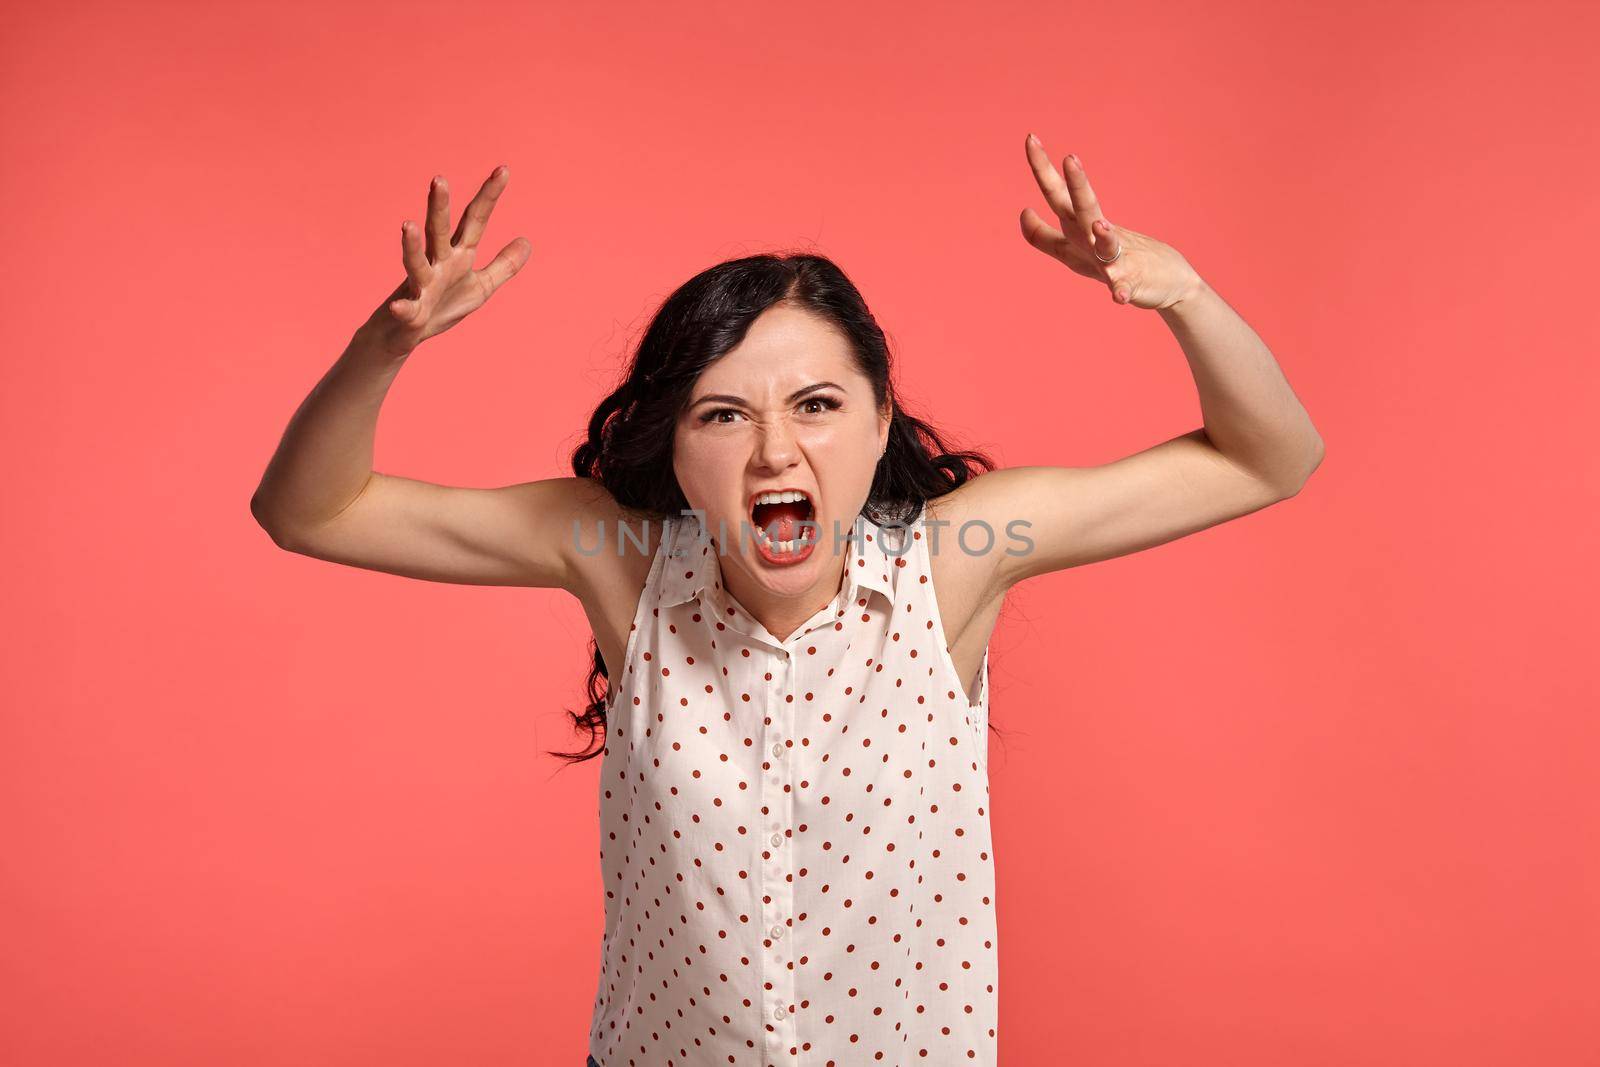 Studio shot of an adorable adolescent girl looking mad, wearing casual white polka dot blouse. Little brunette posing over a pink background. People and sincere emotions.